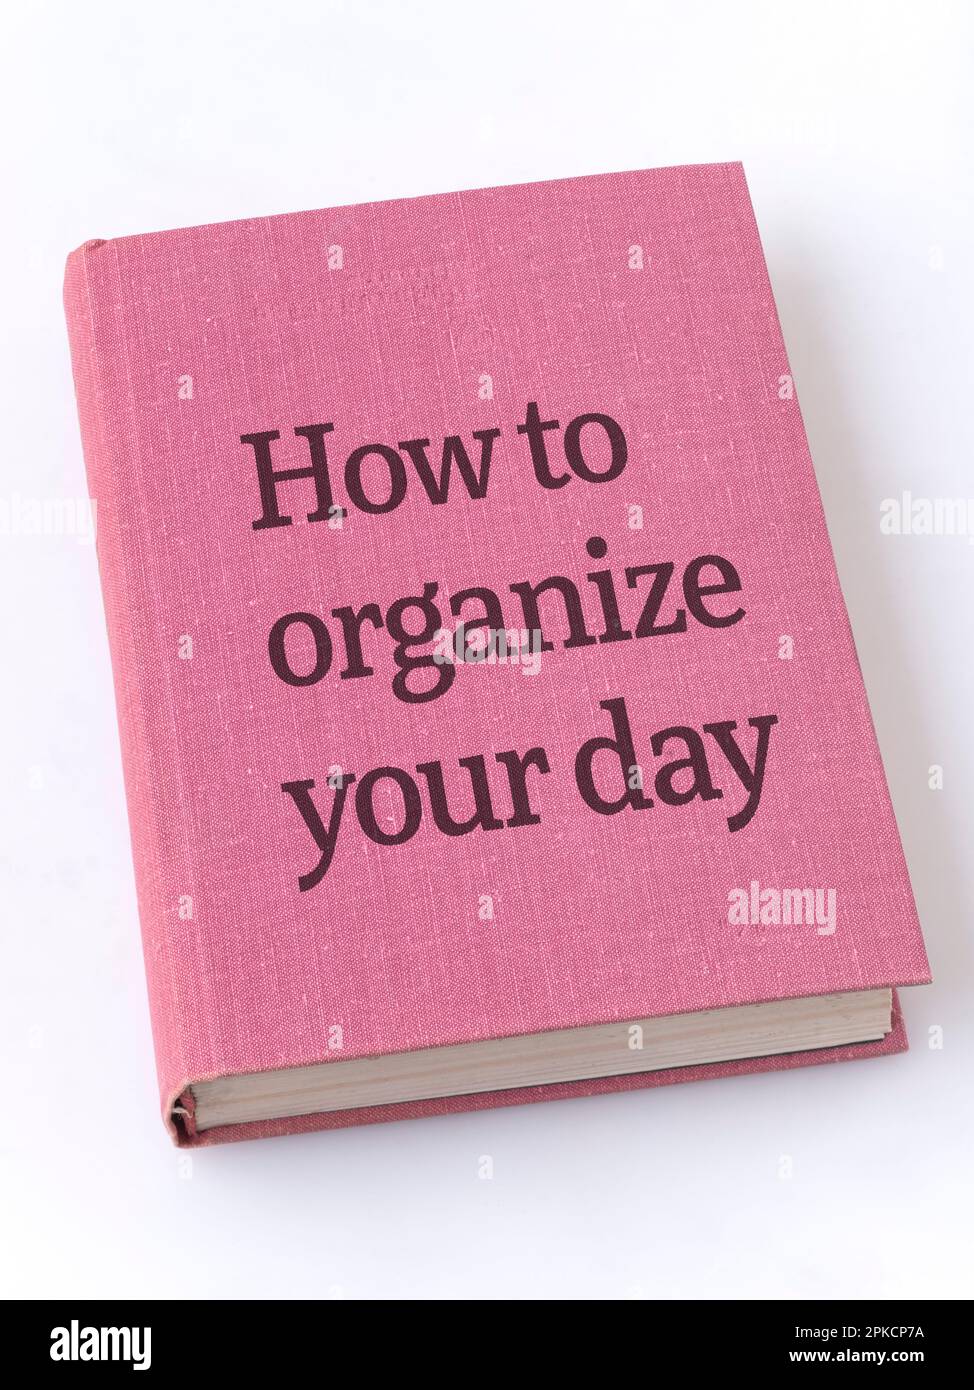 how to organize day phrase printed on textile book cover Stock Photo